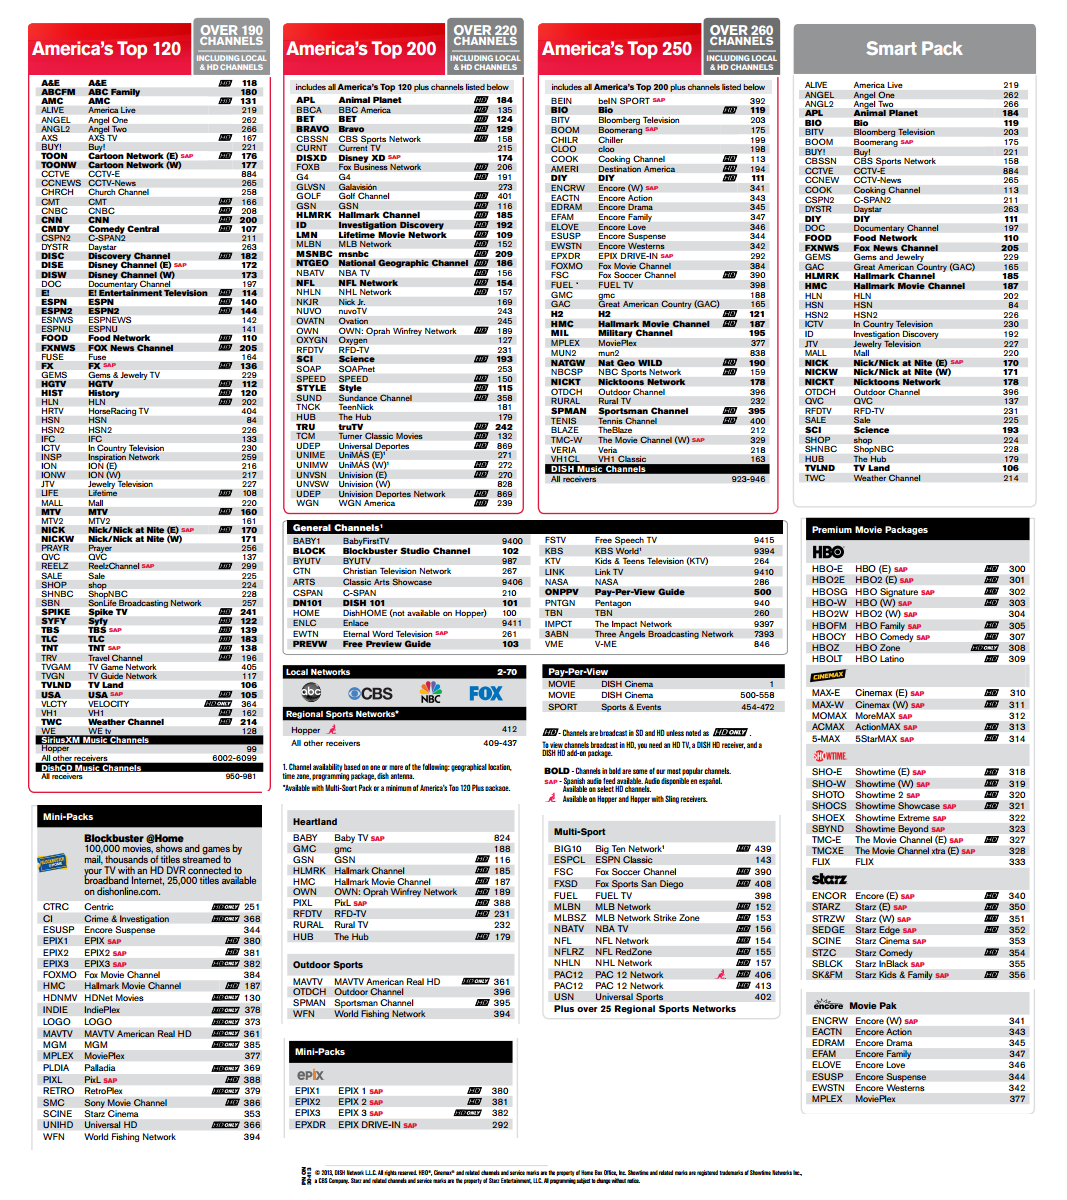 Dish Network Packages Printable List